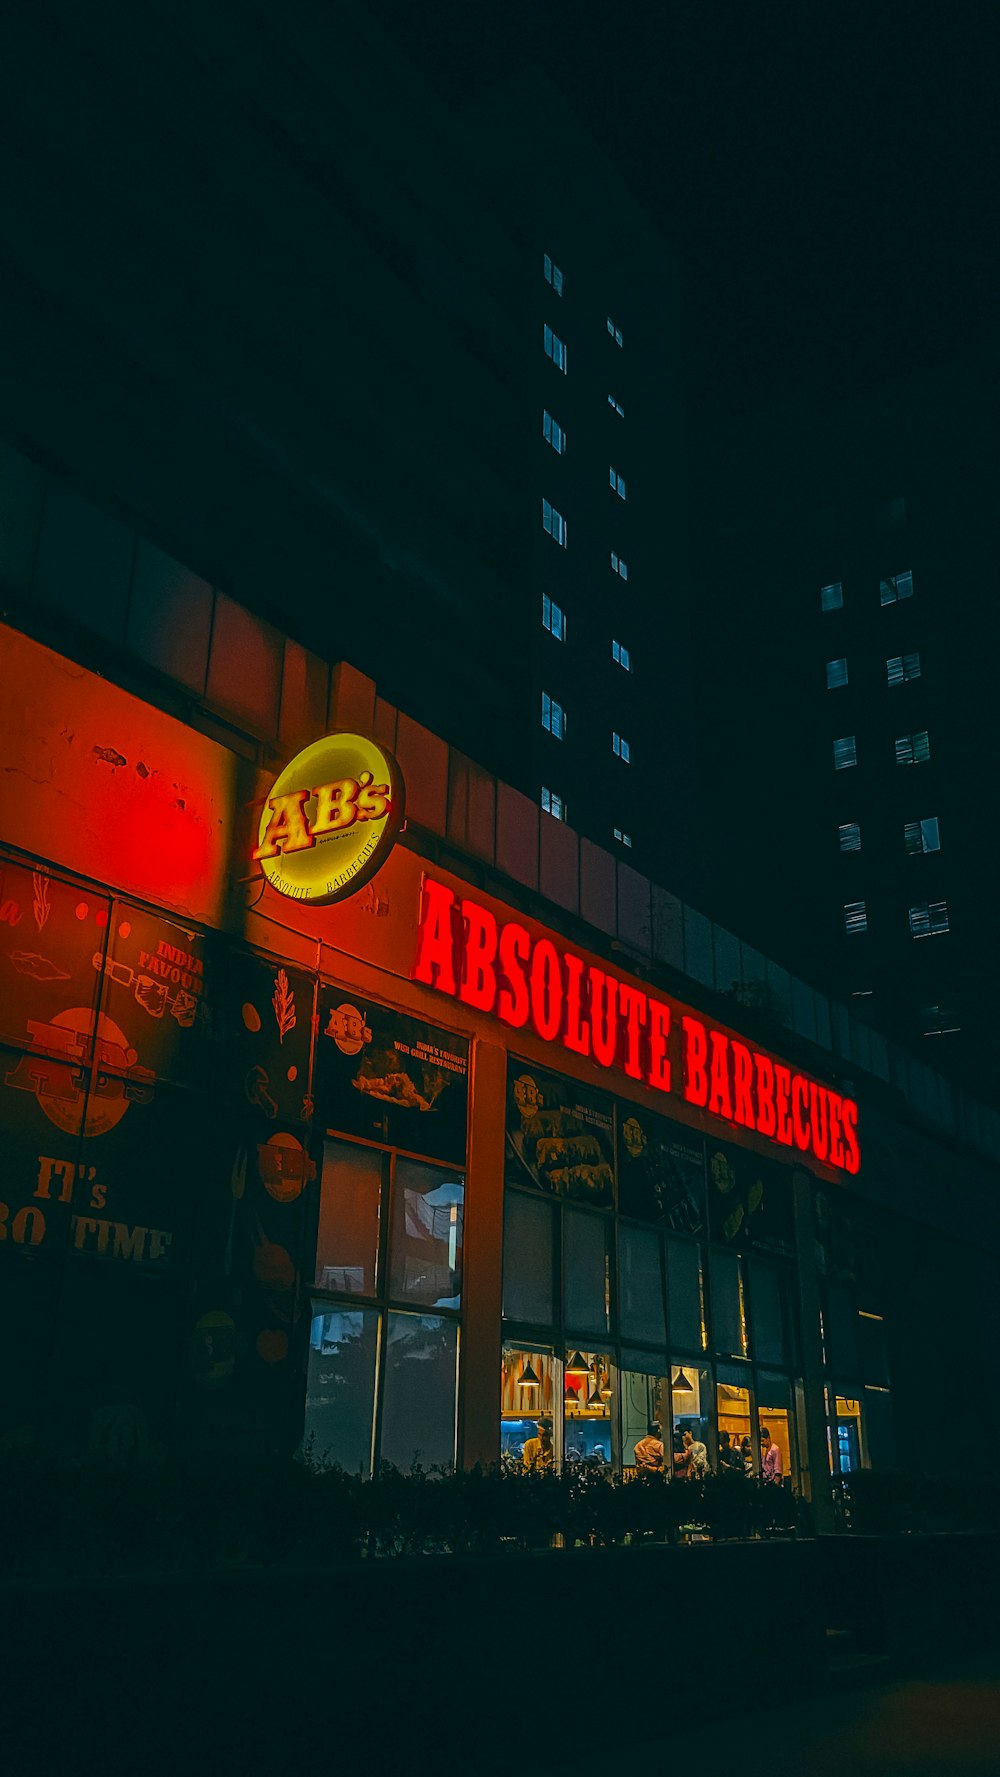 a lit up barbeque at night in a city